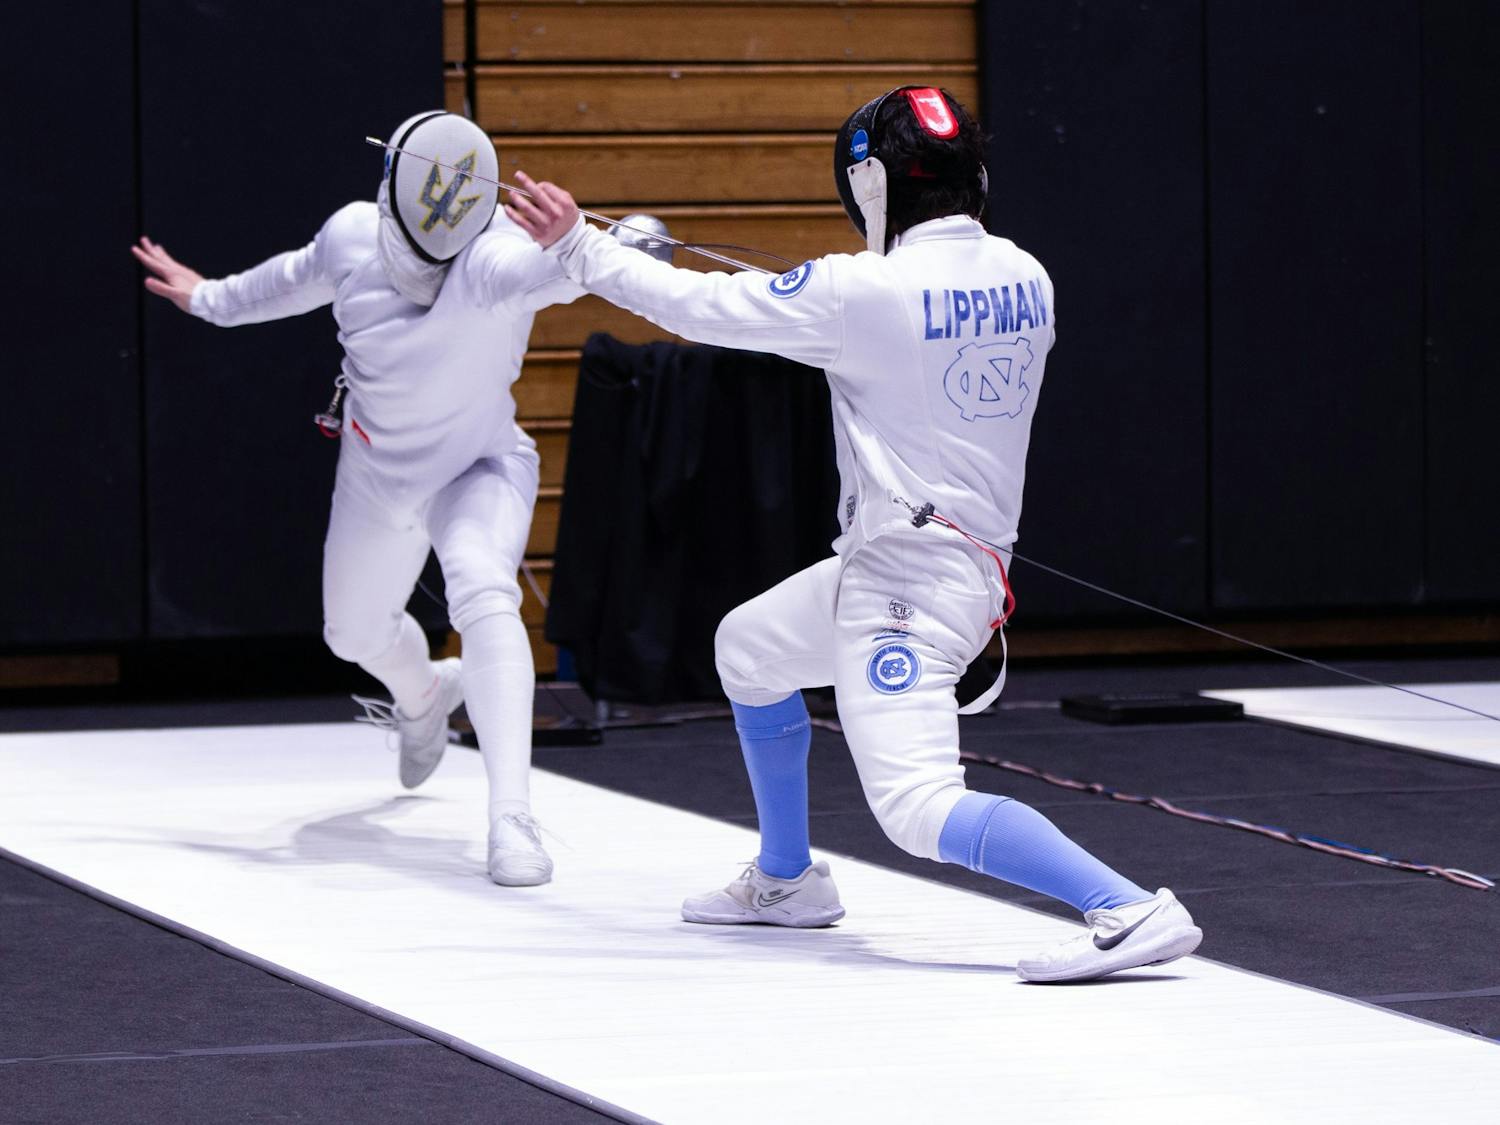 UNC sophomore epee/right hand Eli Lippman fences during the NCAA Fencing Championships at Cameron Indoor Stadium in Durham, N.C. on Friday, March 24, 2023.